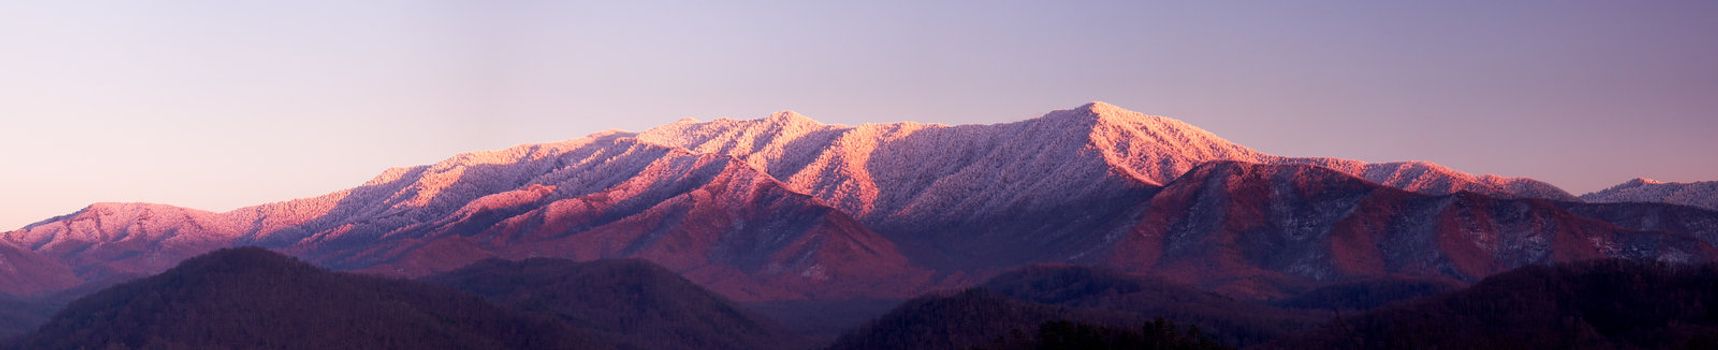 Sun setting on the Smoky mountains covered in snow above the town of Gatlinburg at dusk